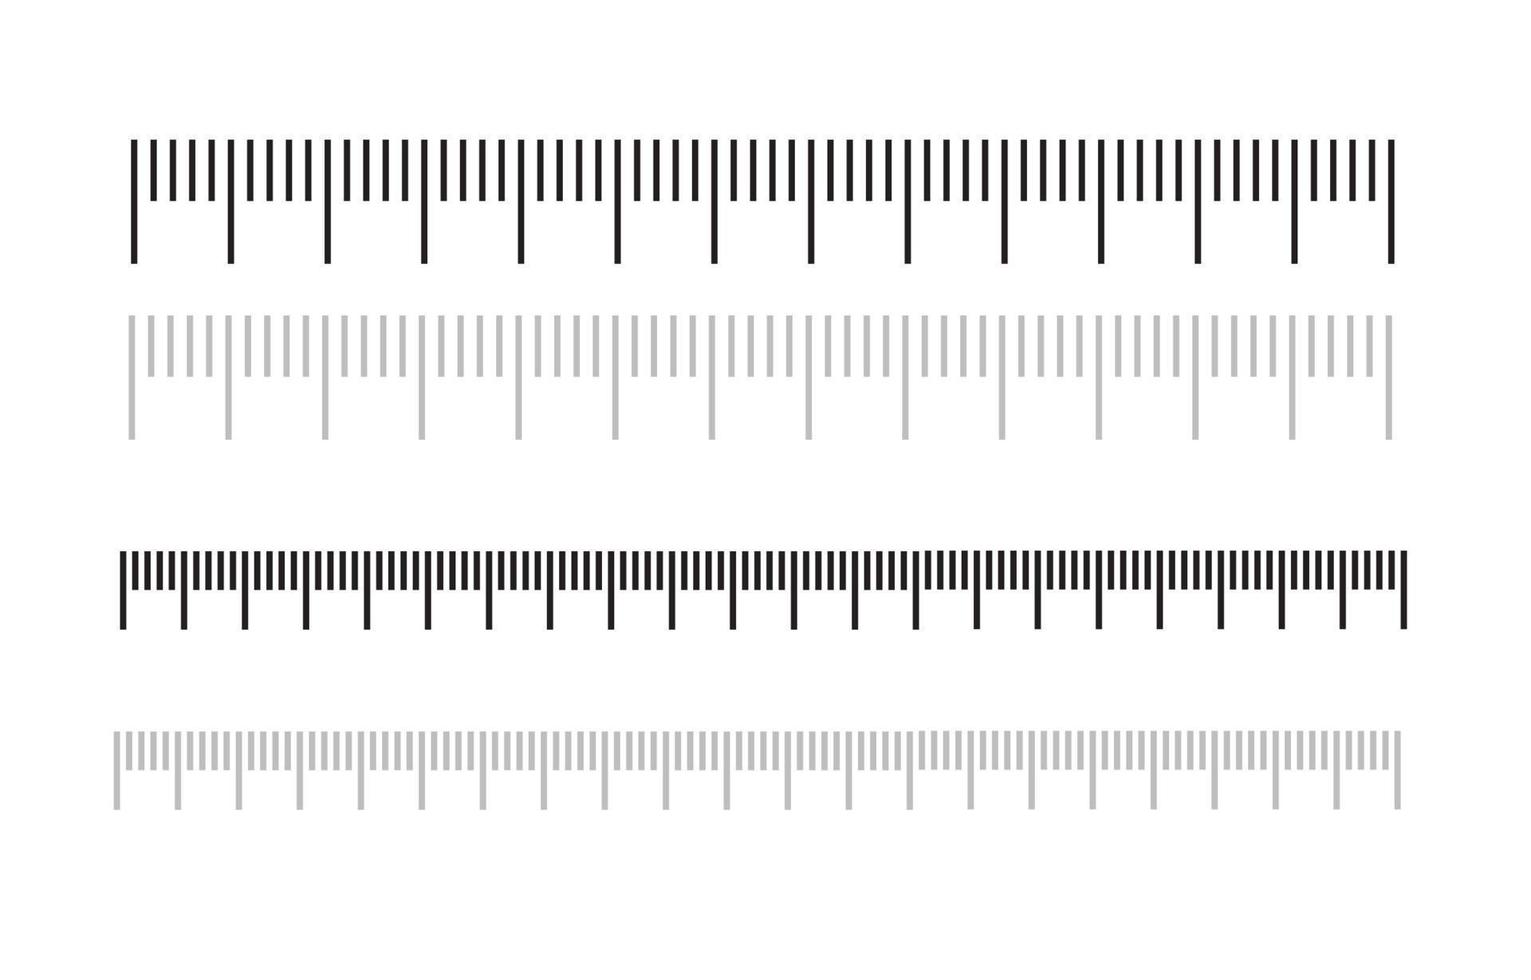 Measuring scale, 10 centimeters, cm chart, different markup for rulers. Vector illustration in flat style isolated on white background.